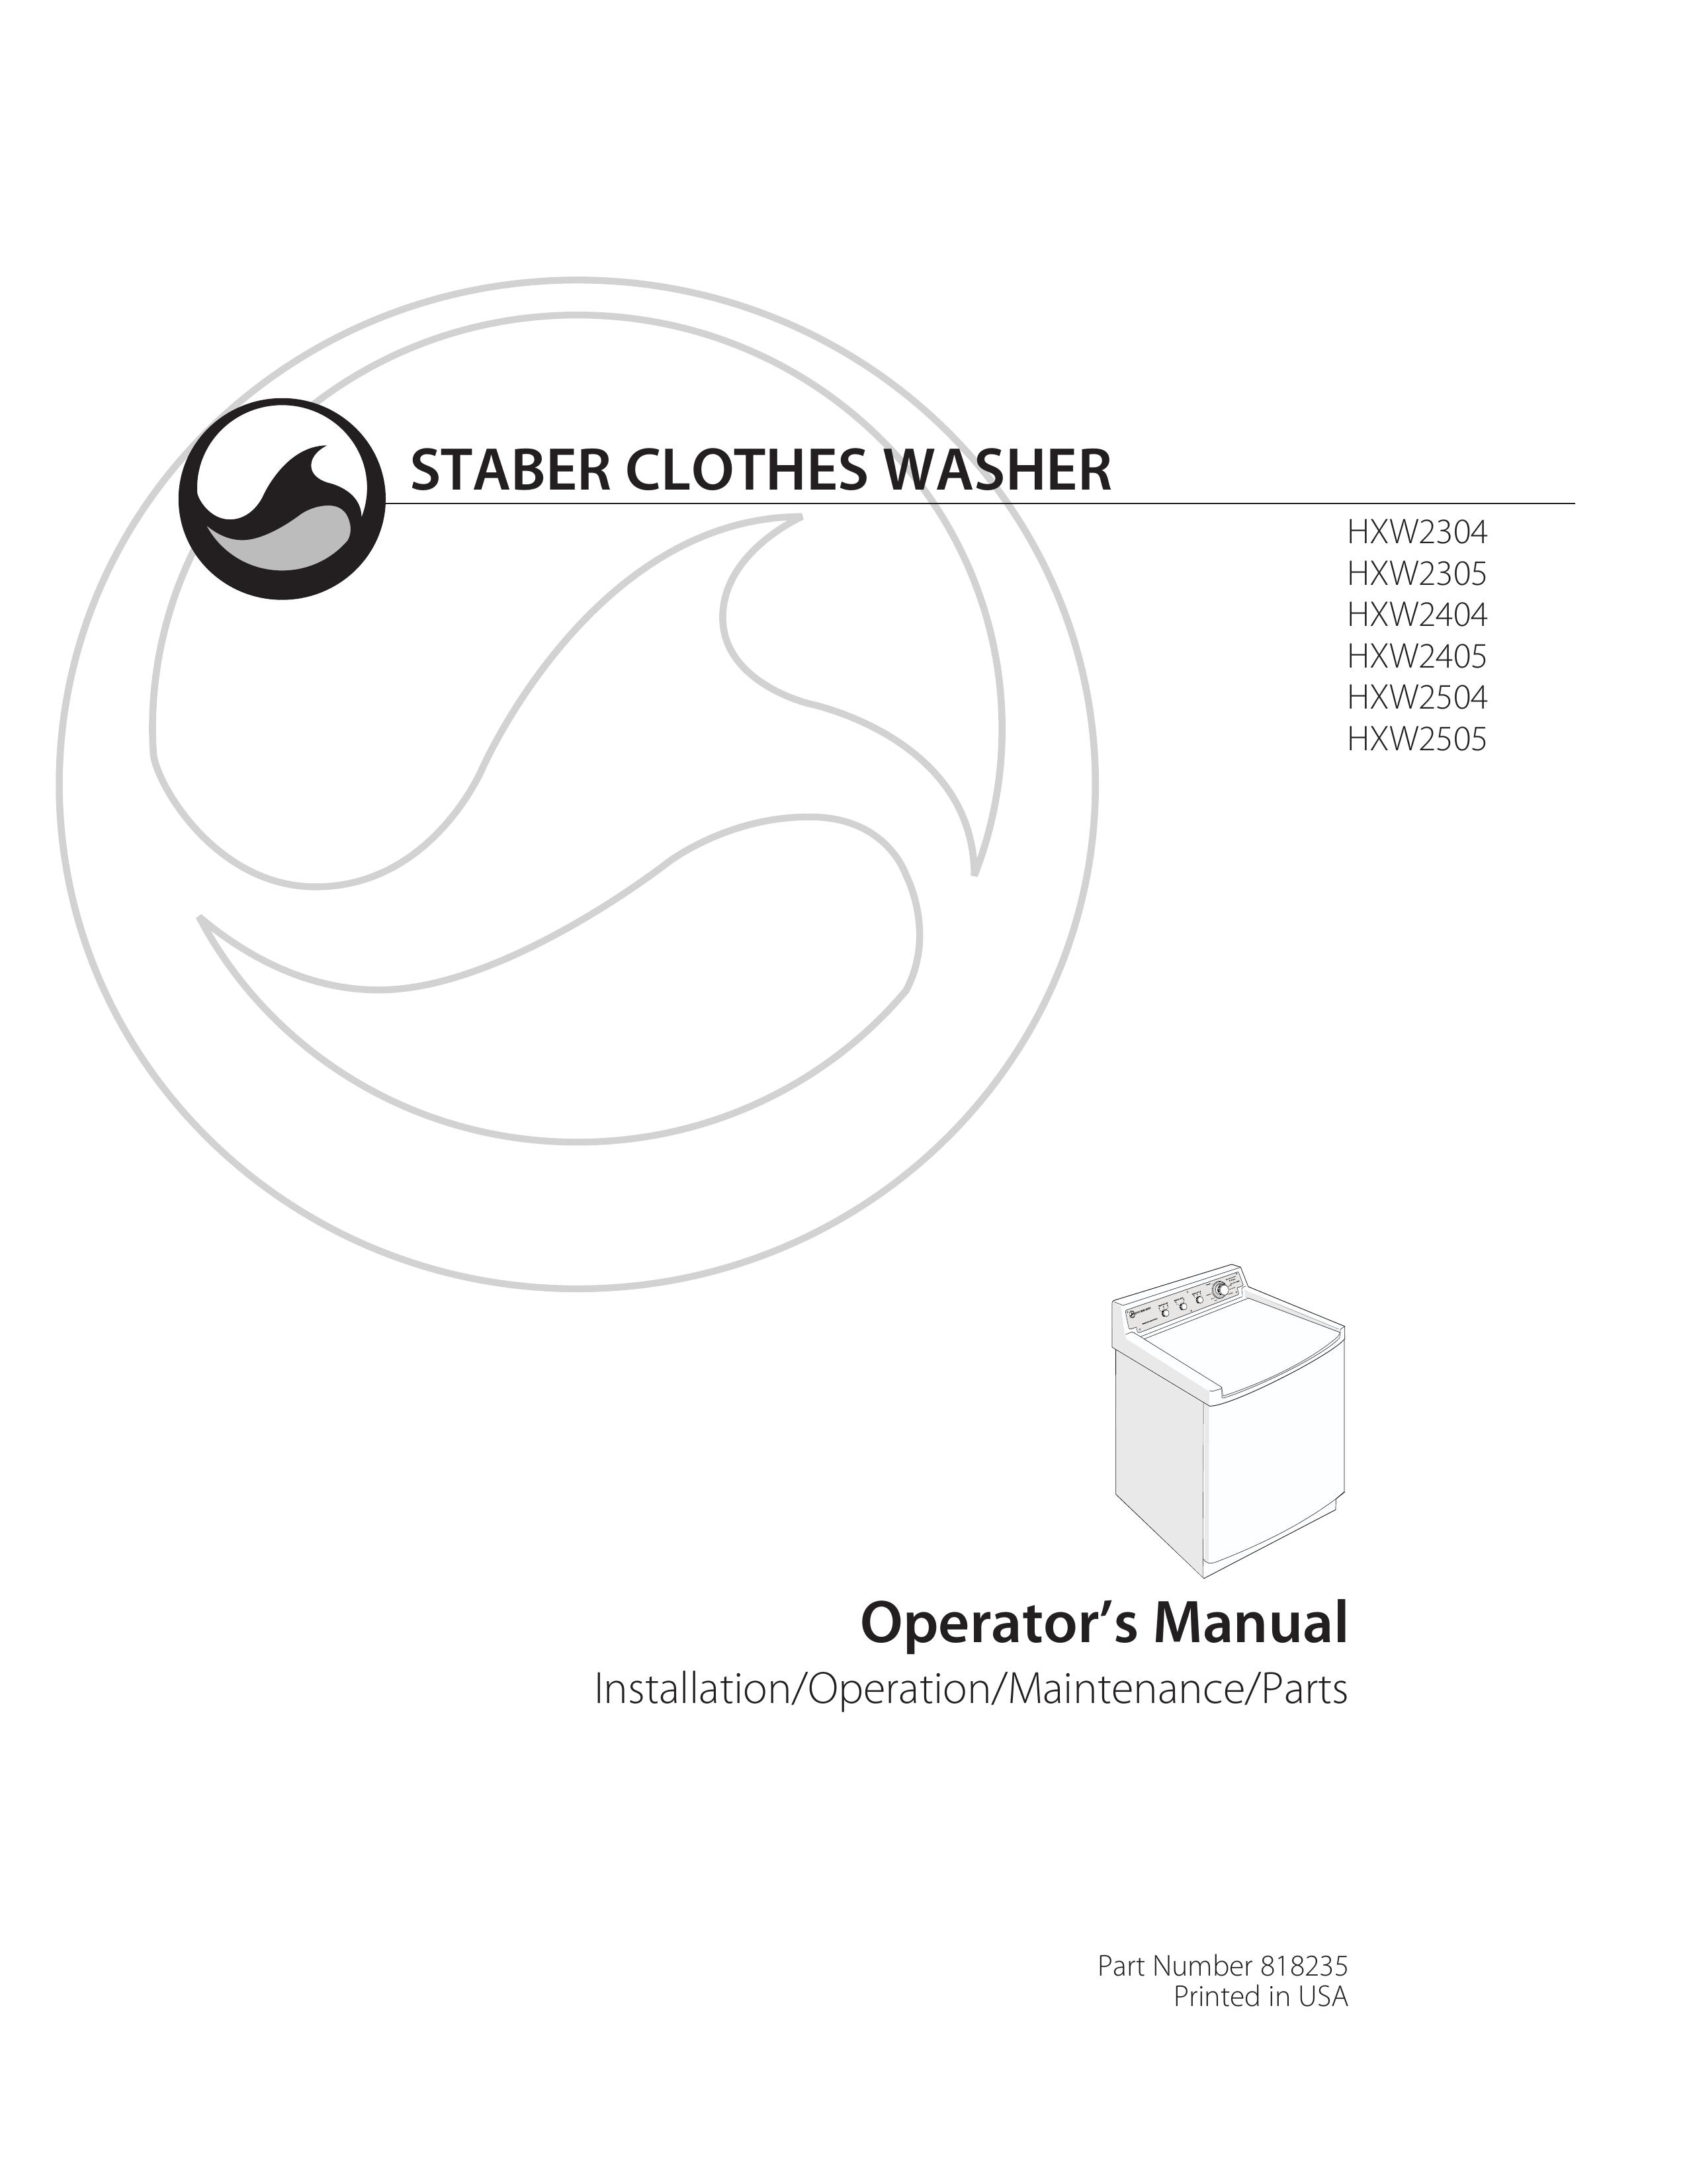 Staber Industries HXW2505 Washer User Manual